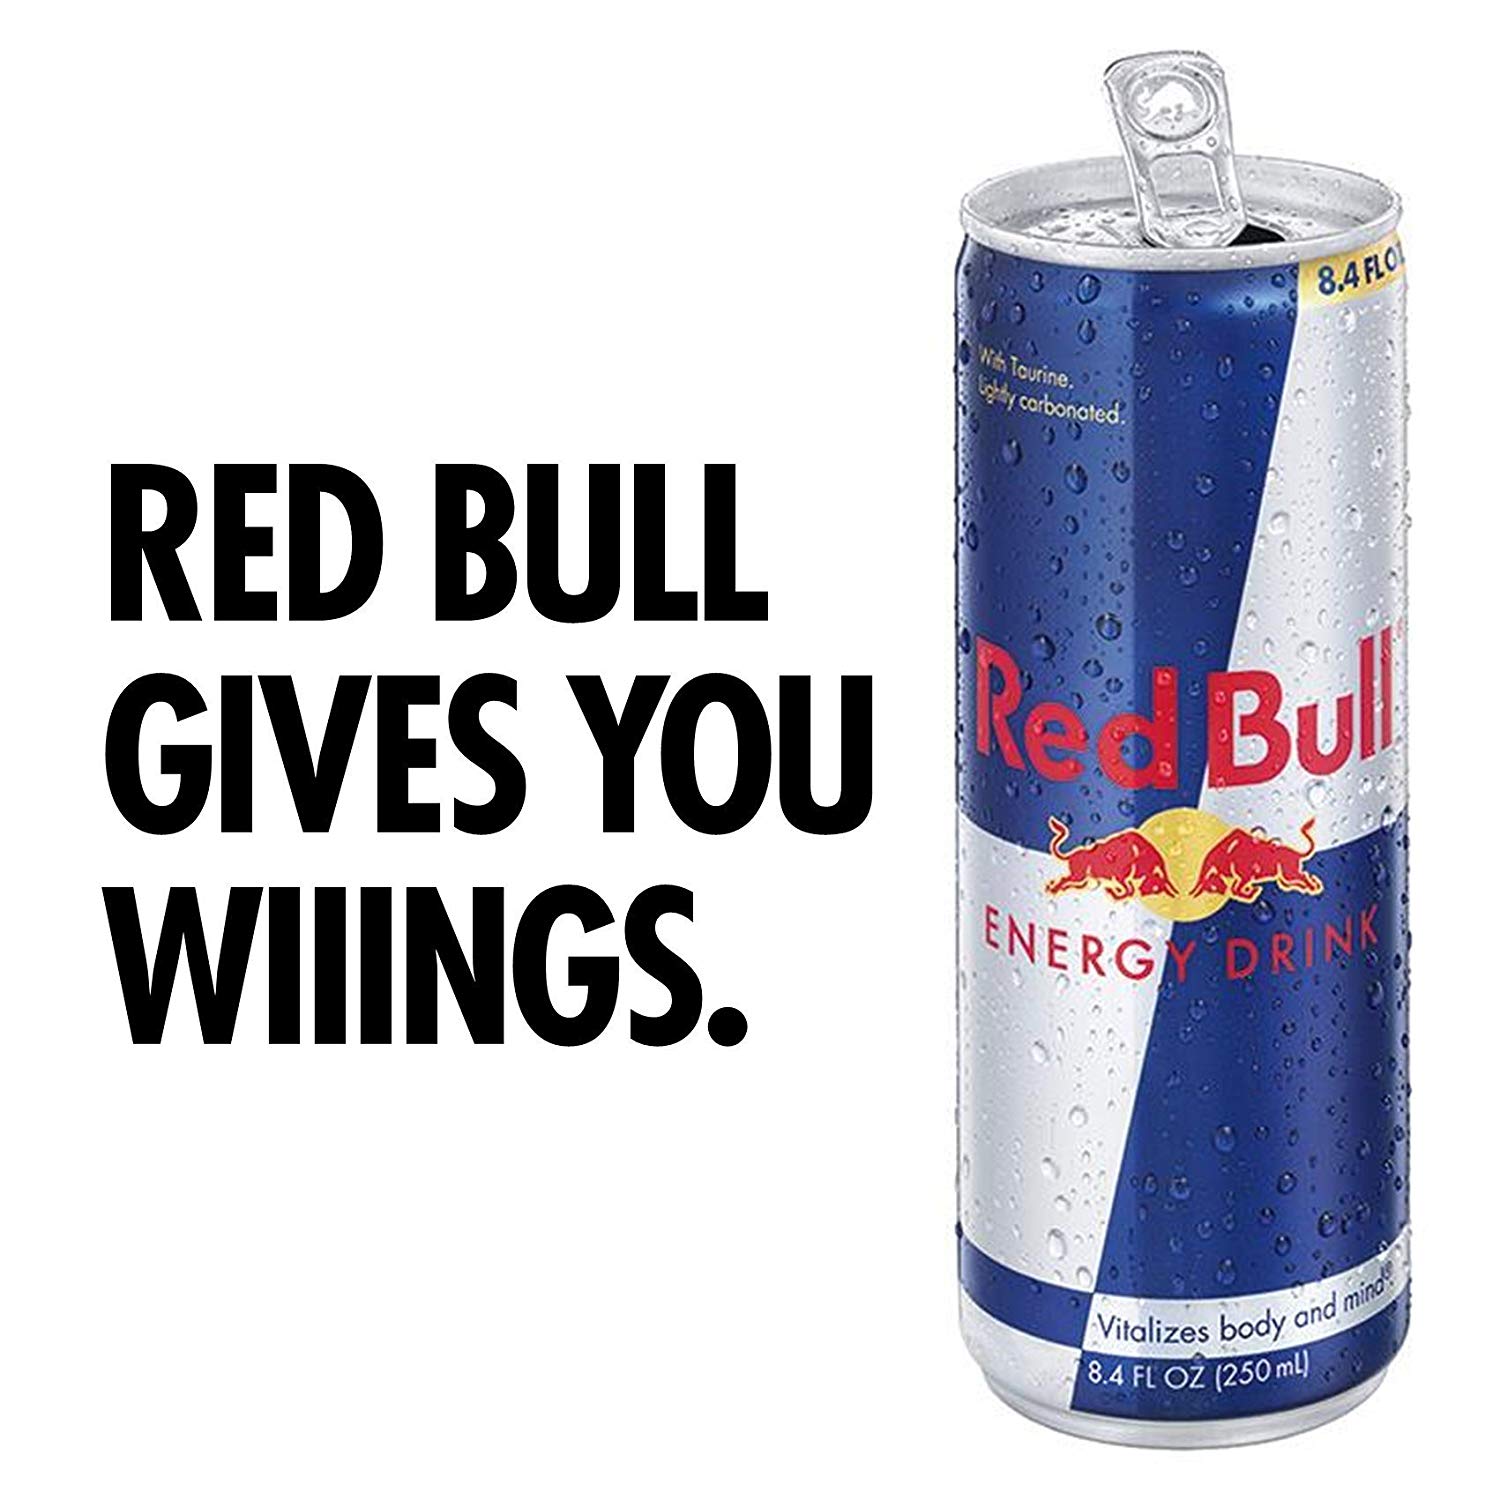 Econtrast UK ASA rules that Red Bull ad implied that the energy